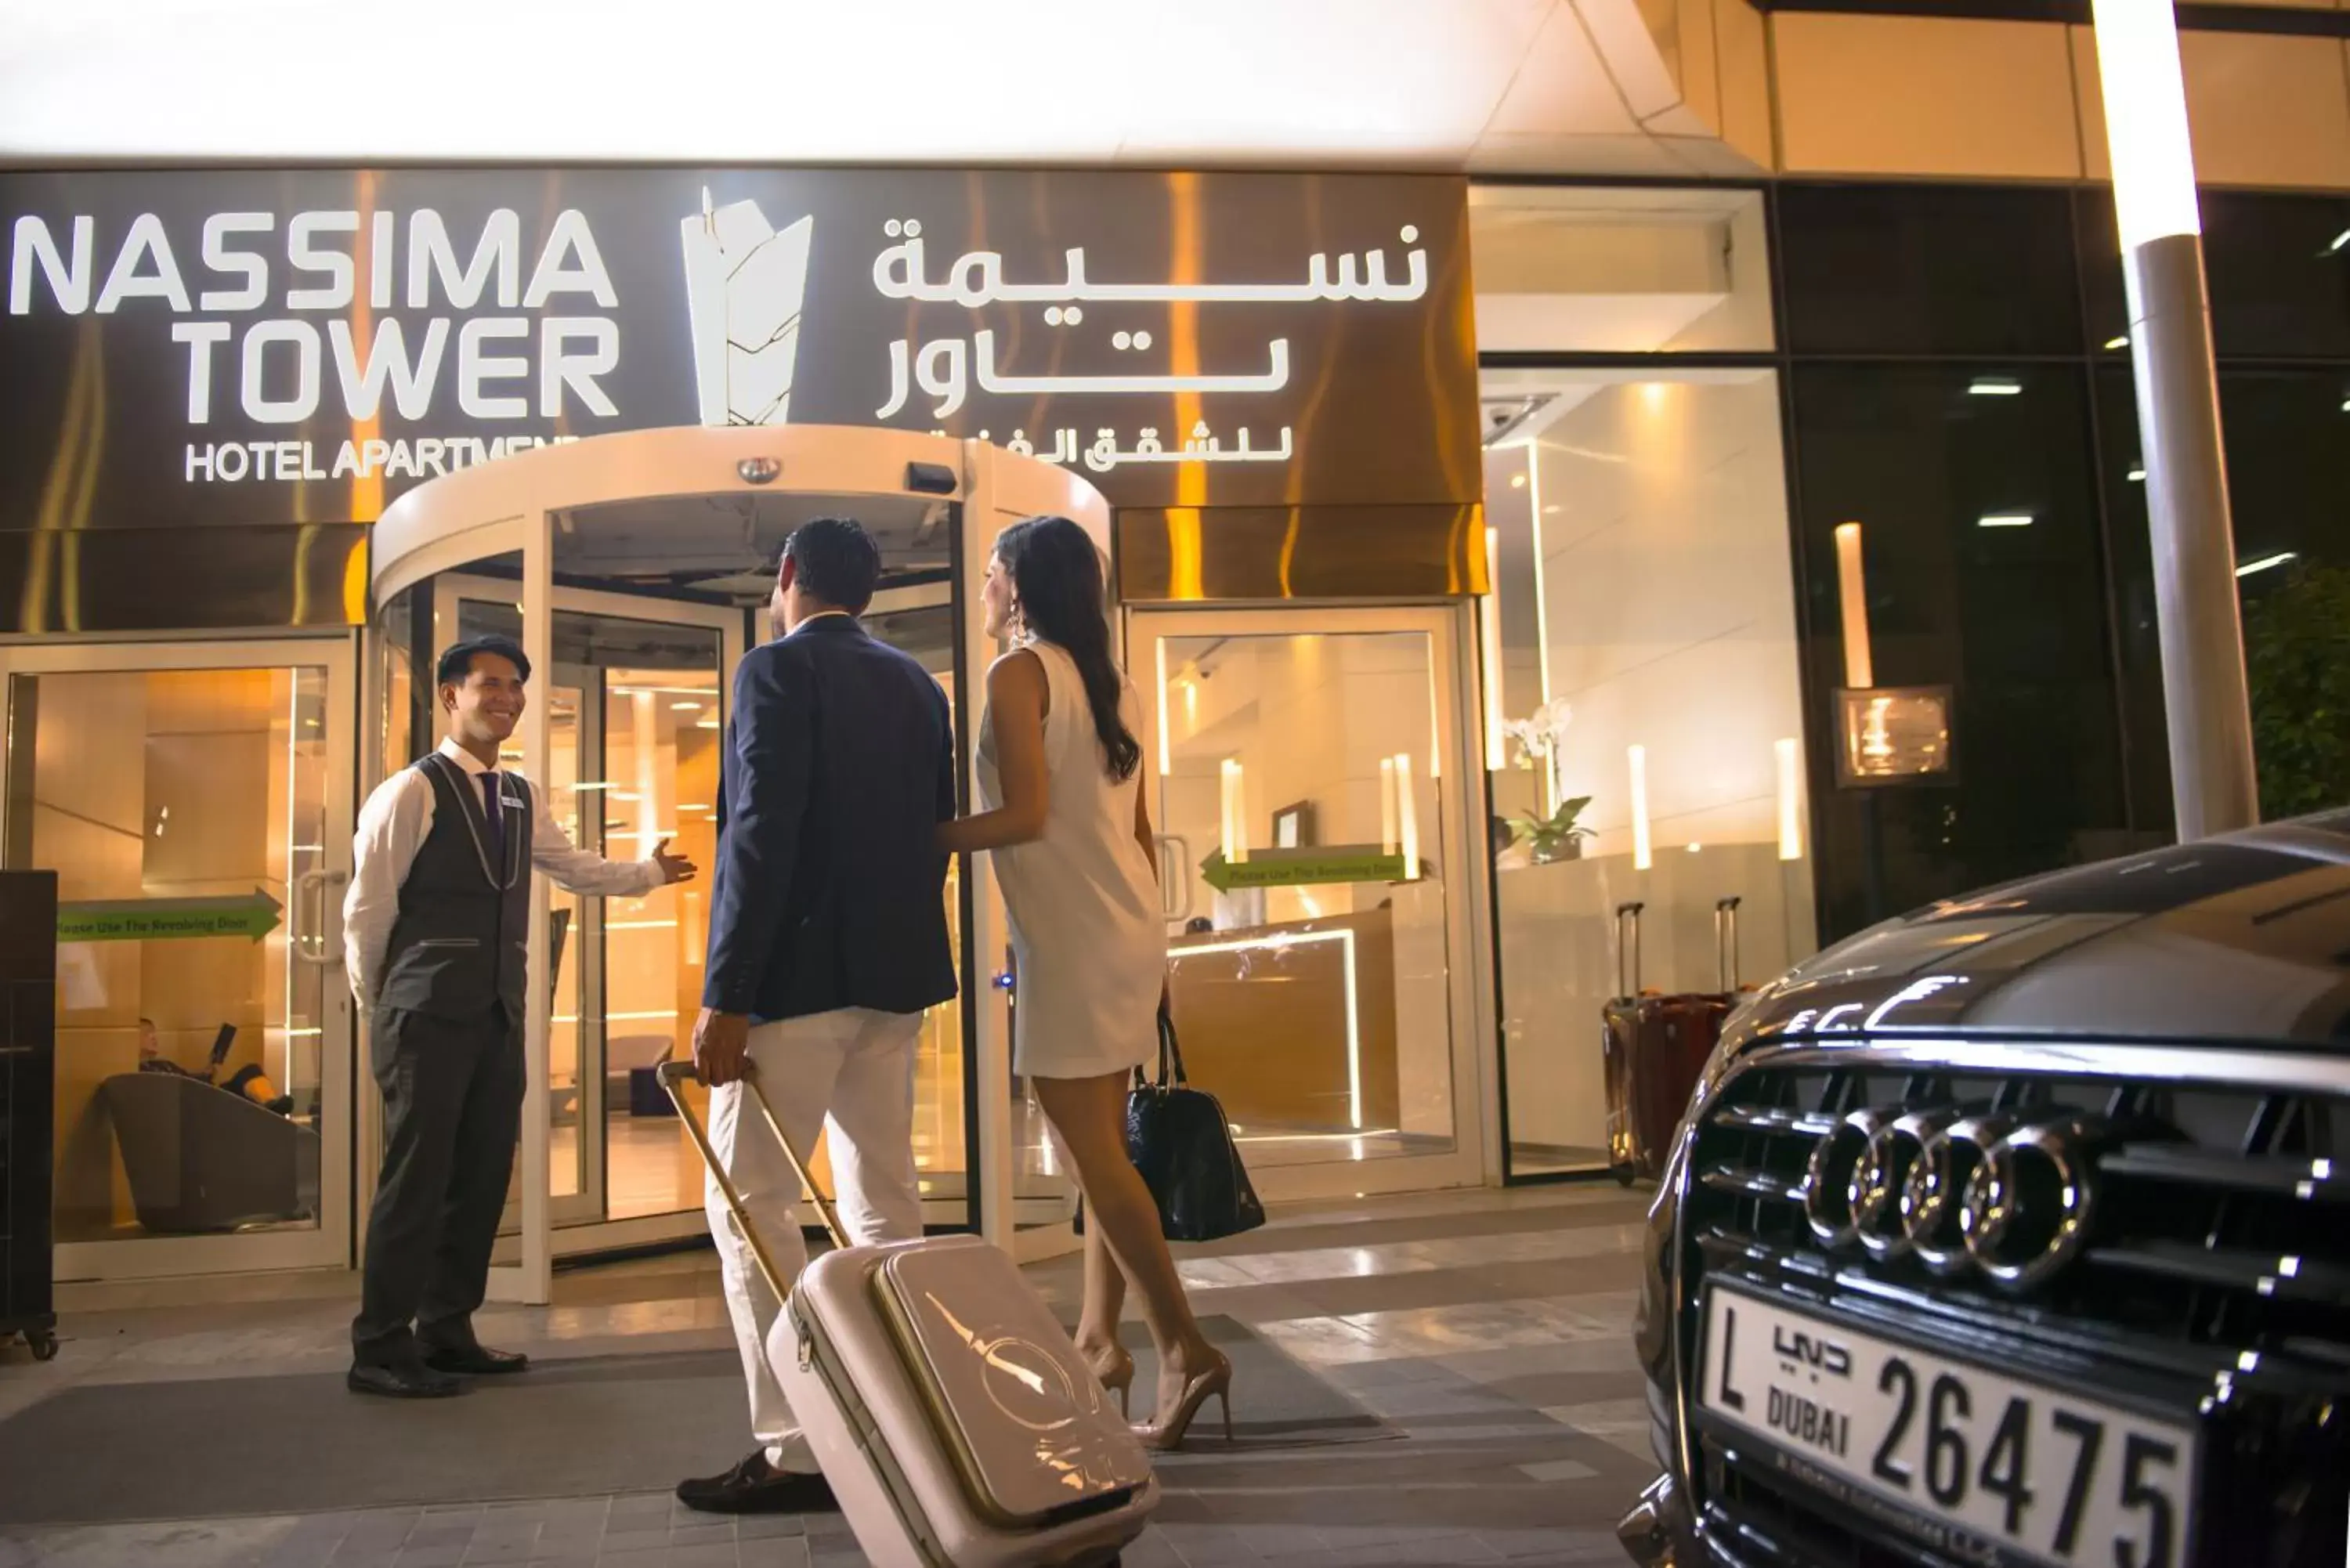 Facade/entrance in Nassima Tower Hotel Apartments